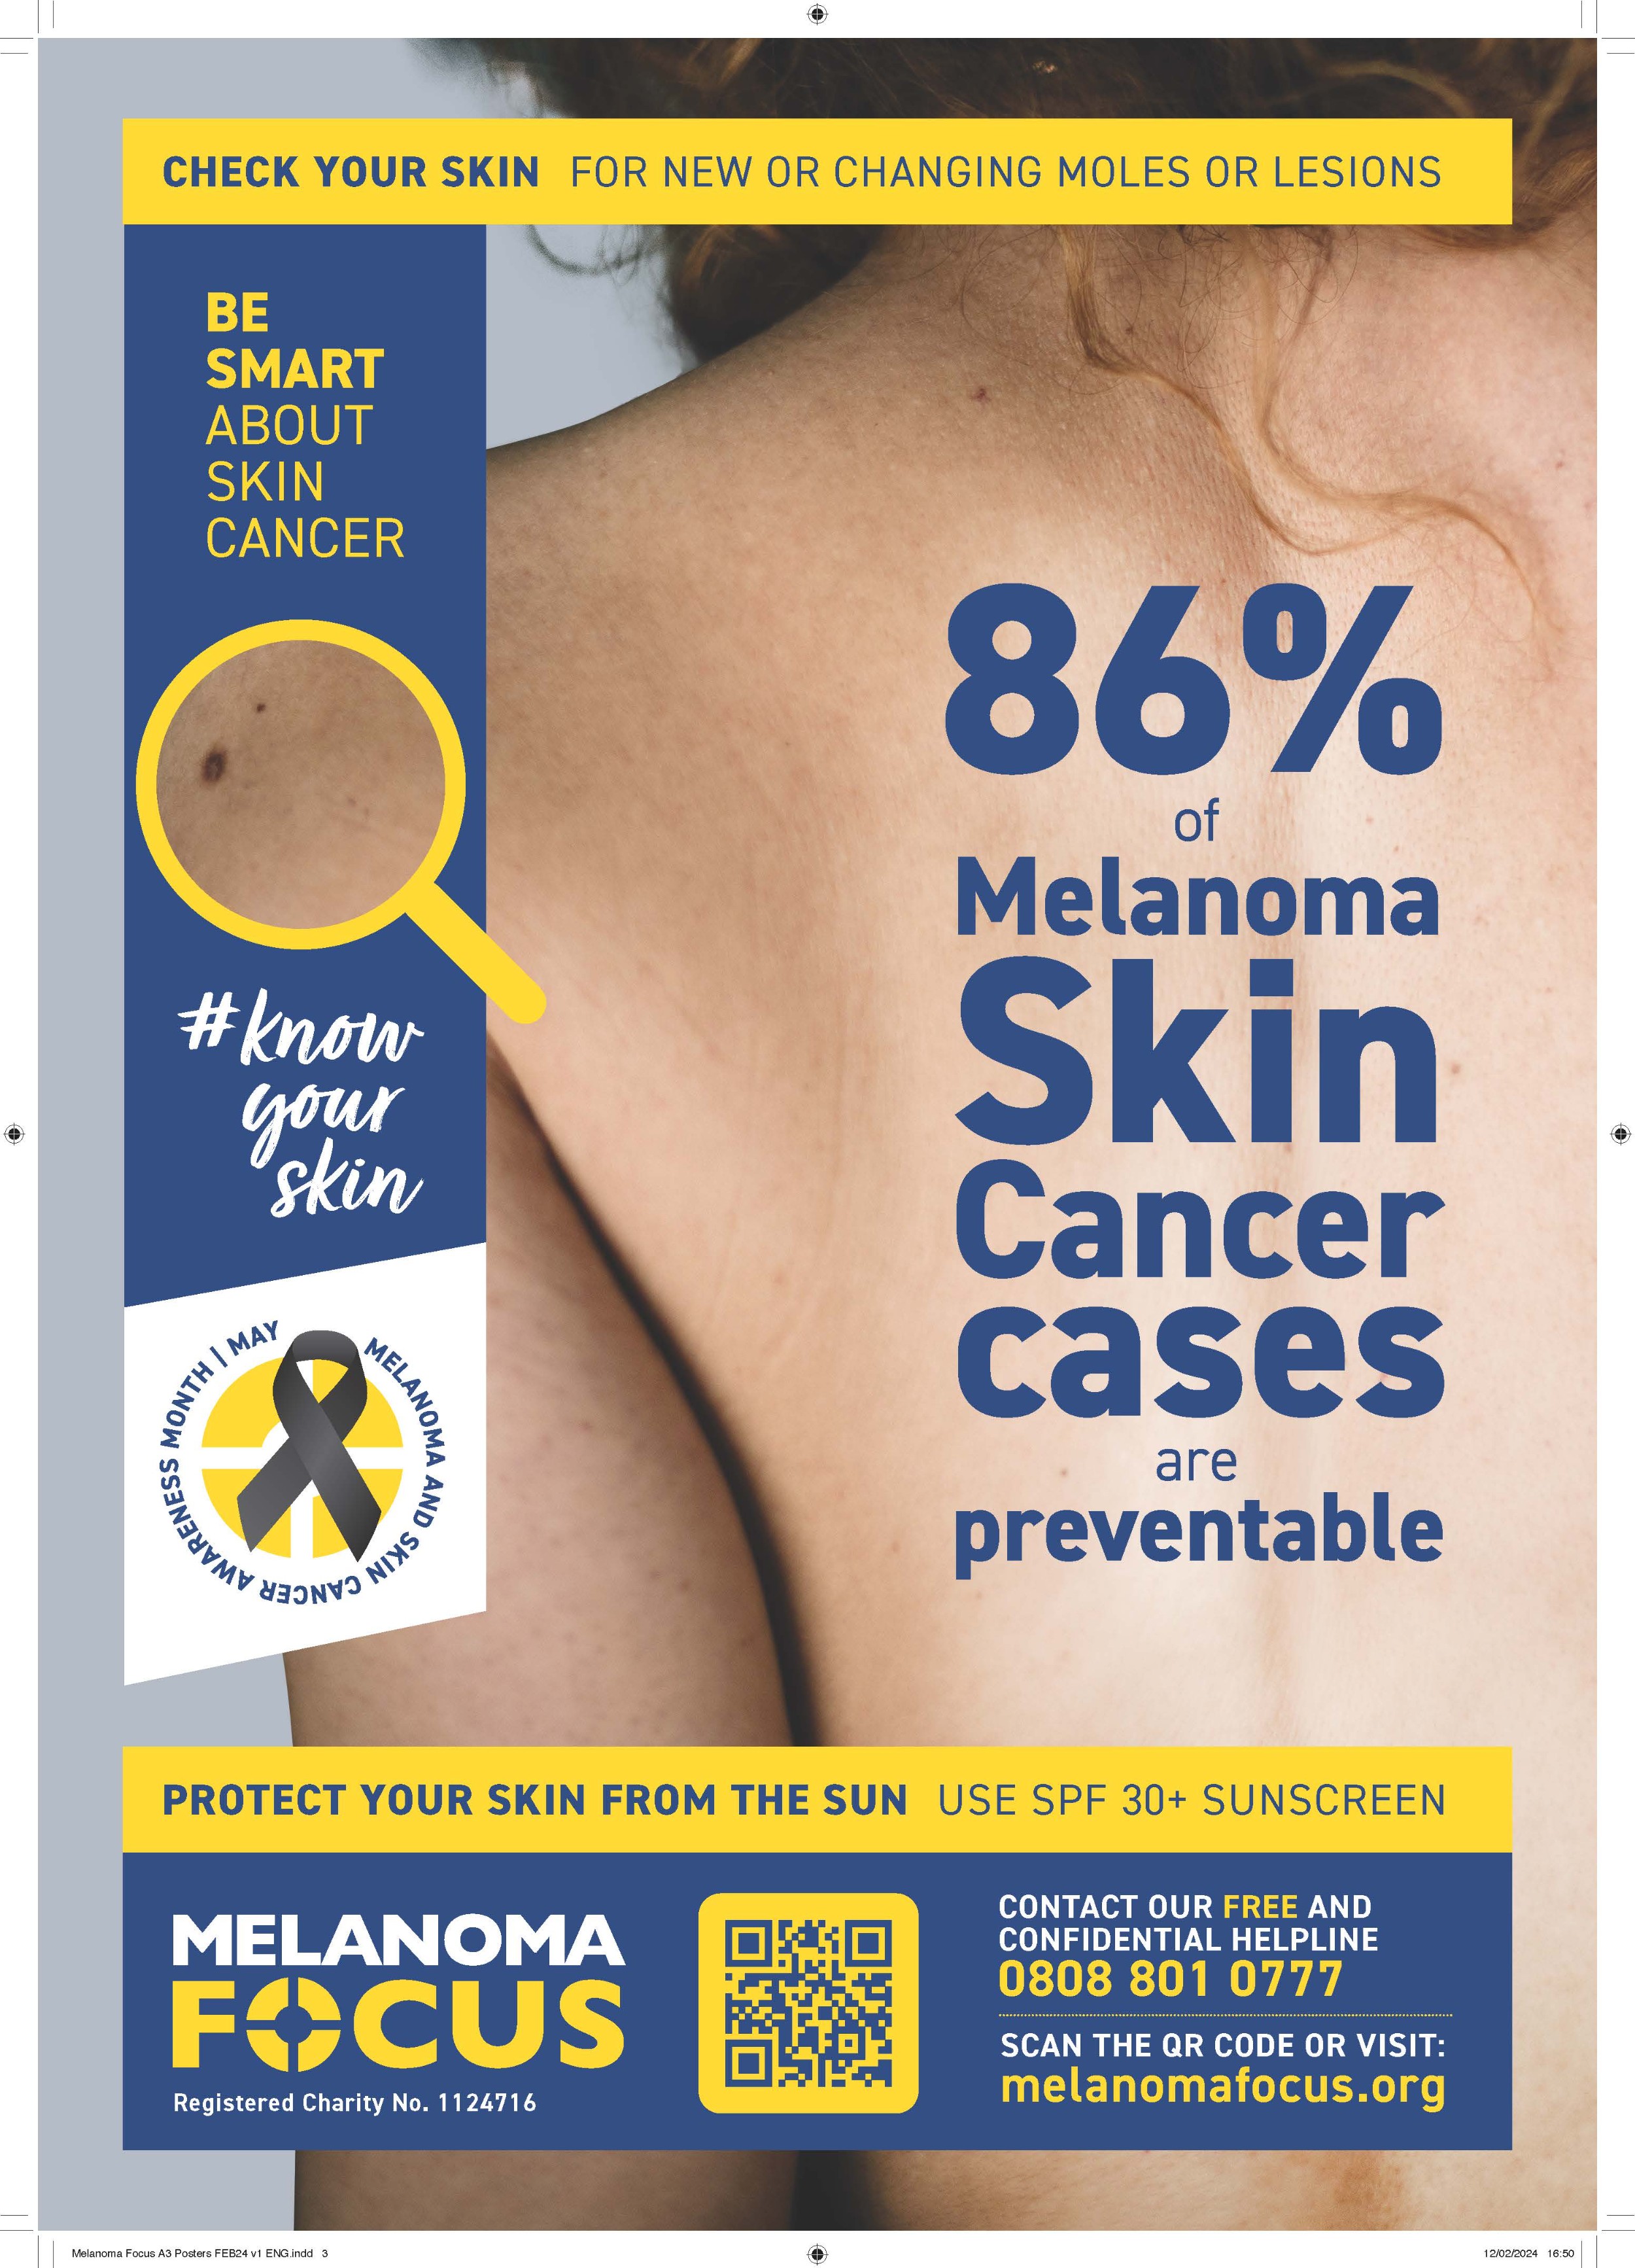 Pages from Melanoma-Focus-A3-Posters-FEB24-v1-ENG.pdf.jpg